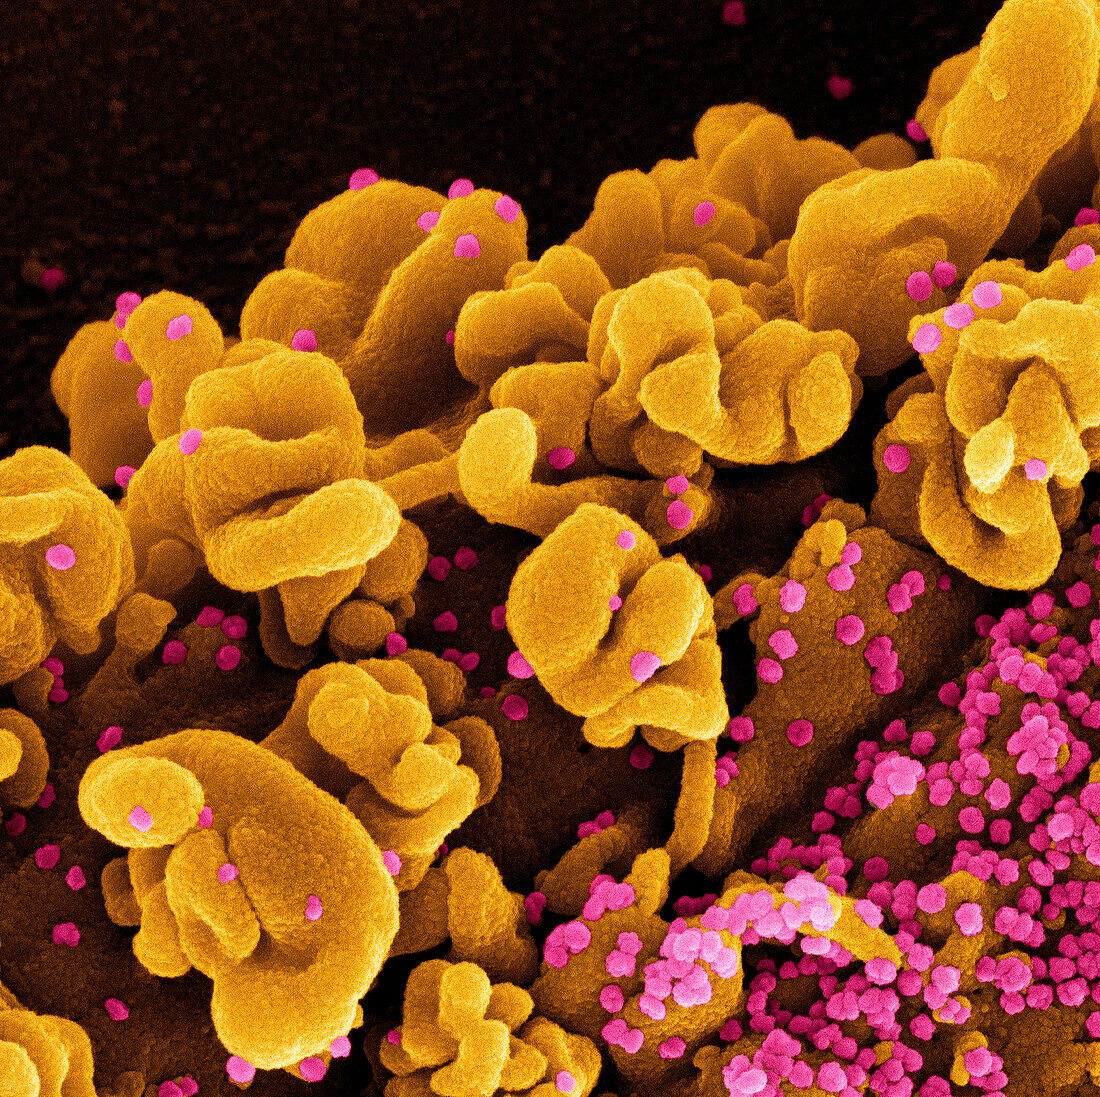 Cell infected by SARS-CoV-2 Omicron virus particles, SEM